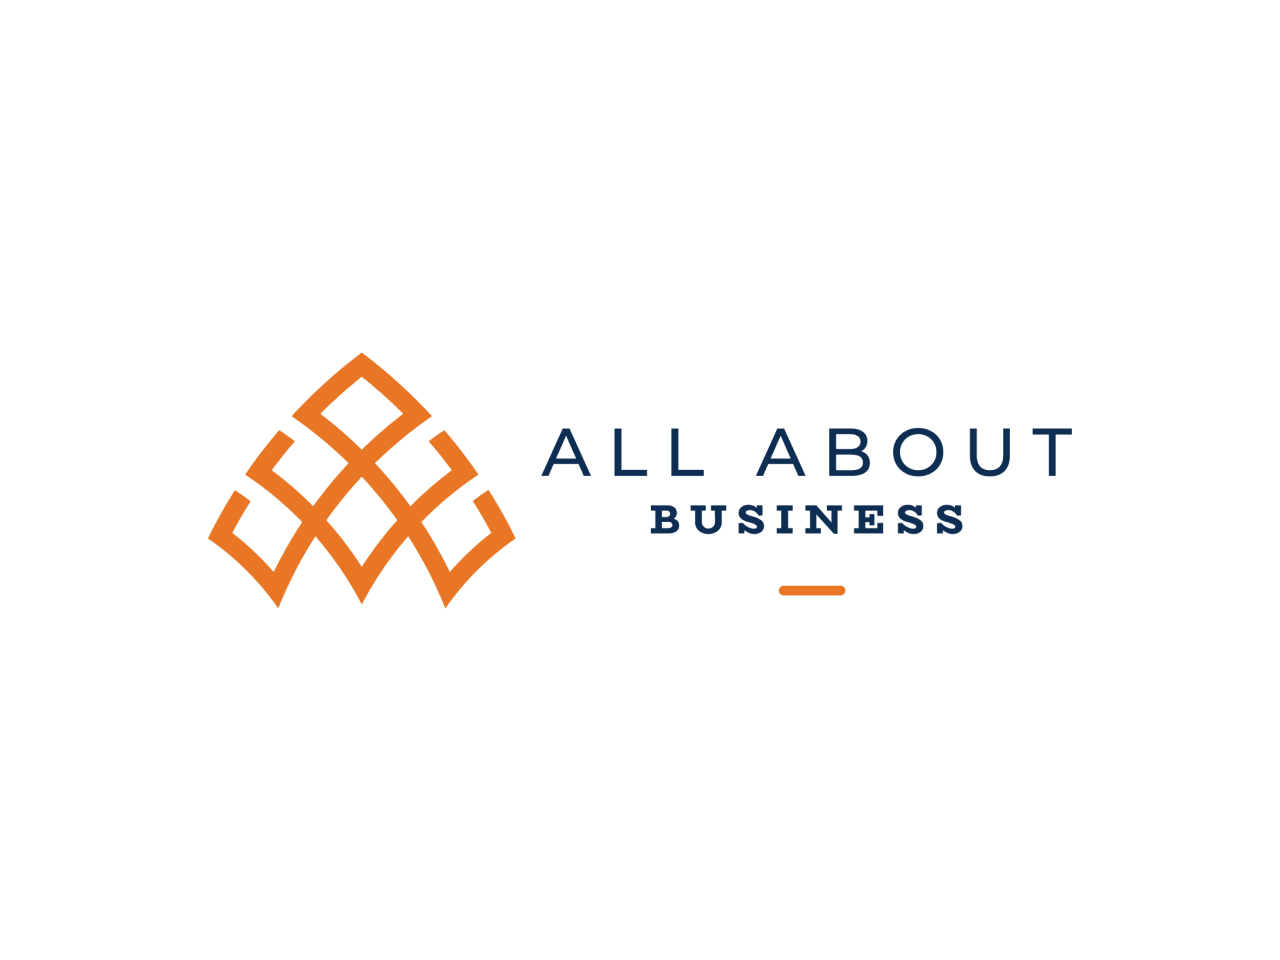 All About Business logo